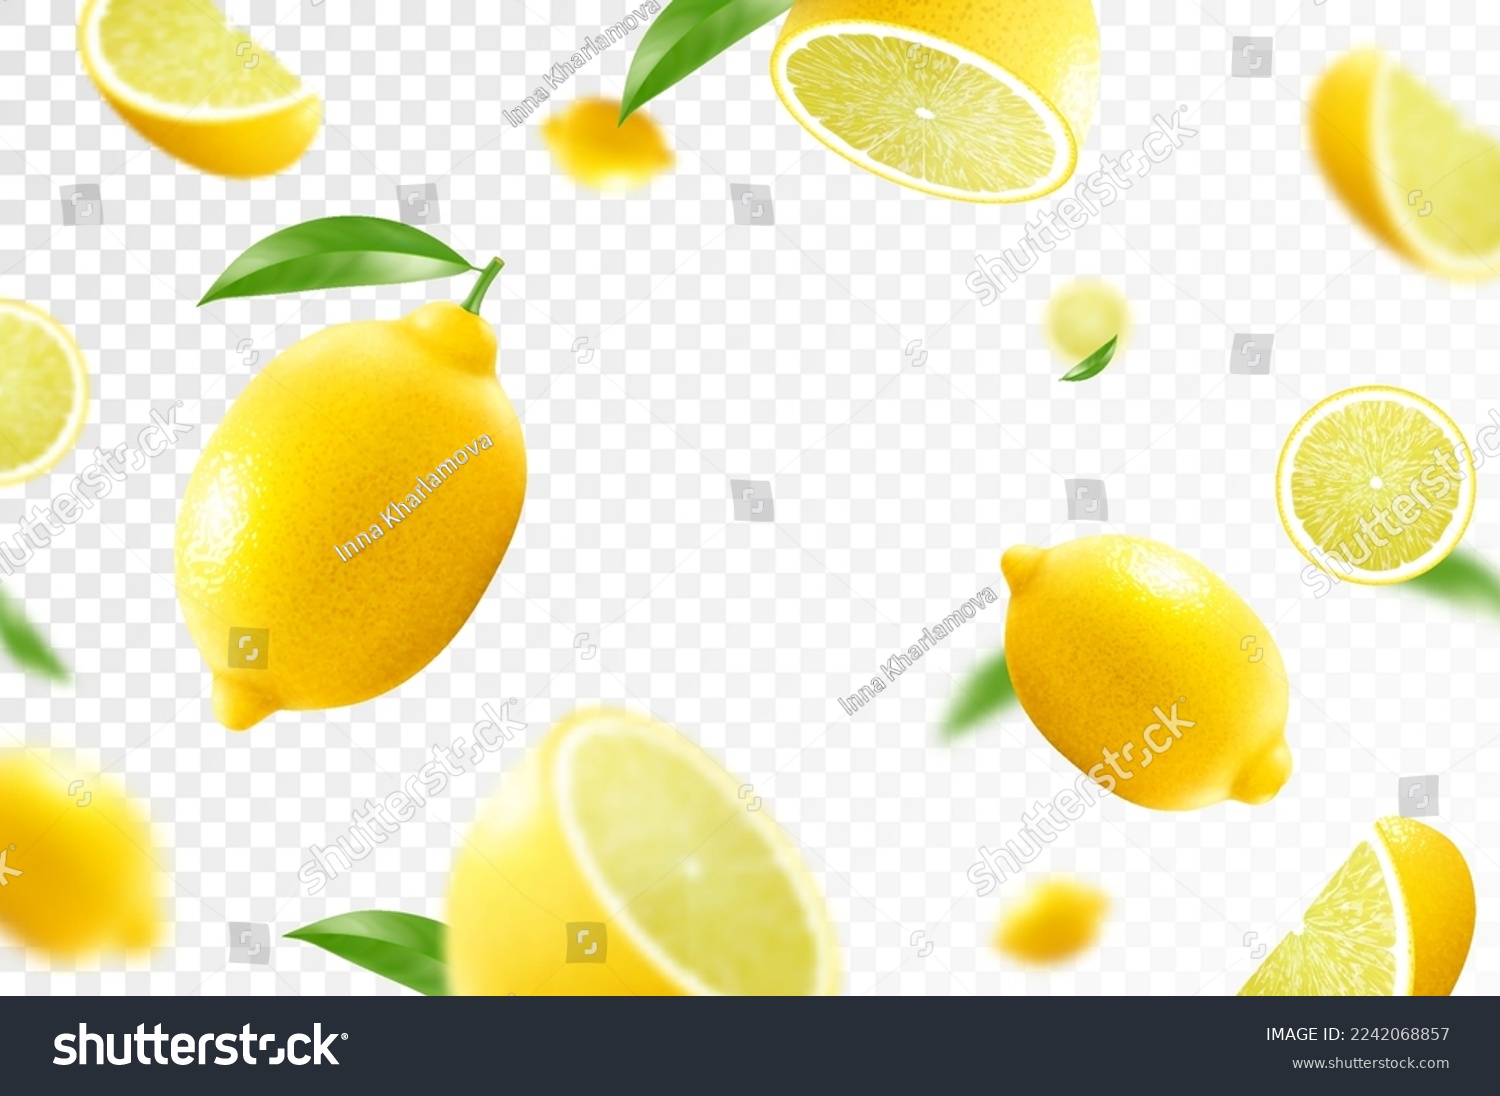 Lemon citrus background. Flying Lemon with green leaf on transparent background. Lemon falling from different angles. Focused and blurry fruits. Realistic 3d vector illustration . #2242068857